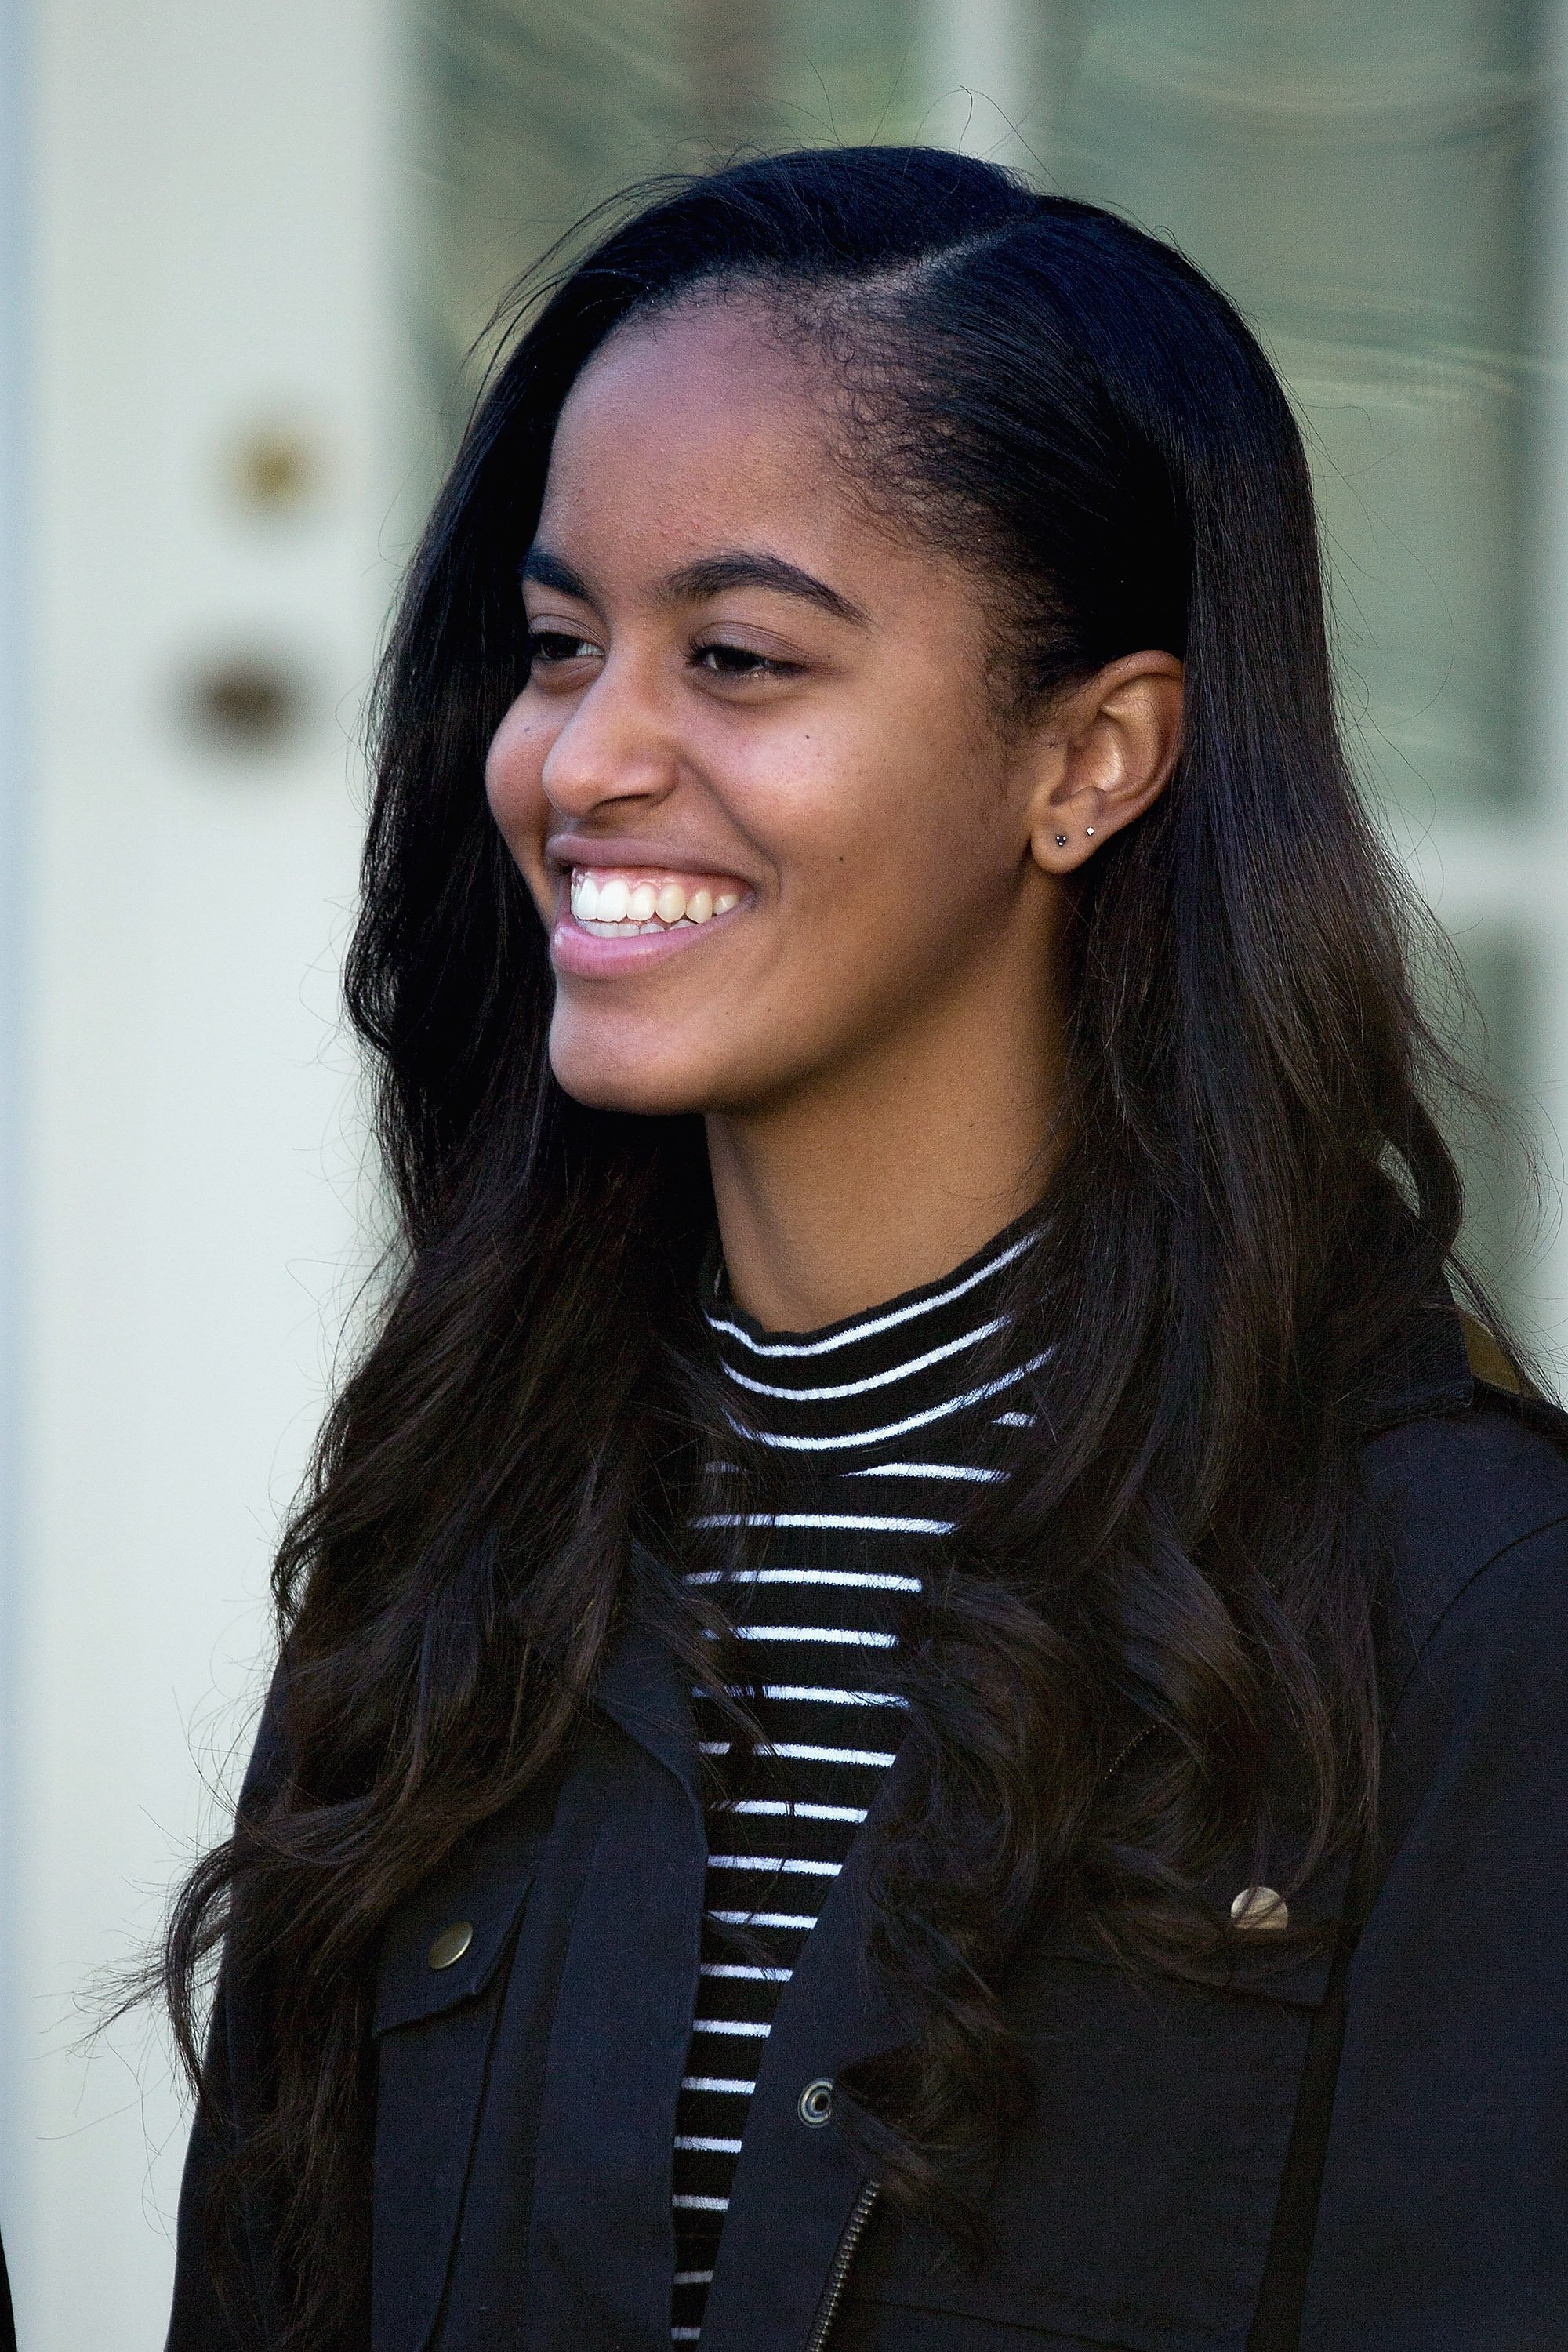 Malia Obama at the turkey pardoning ceremony in the Rose Garden of the White House on November 25, 2015.